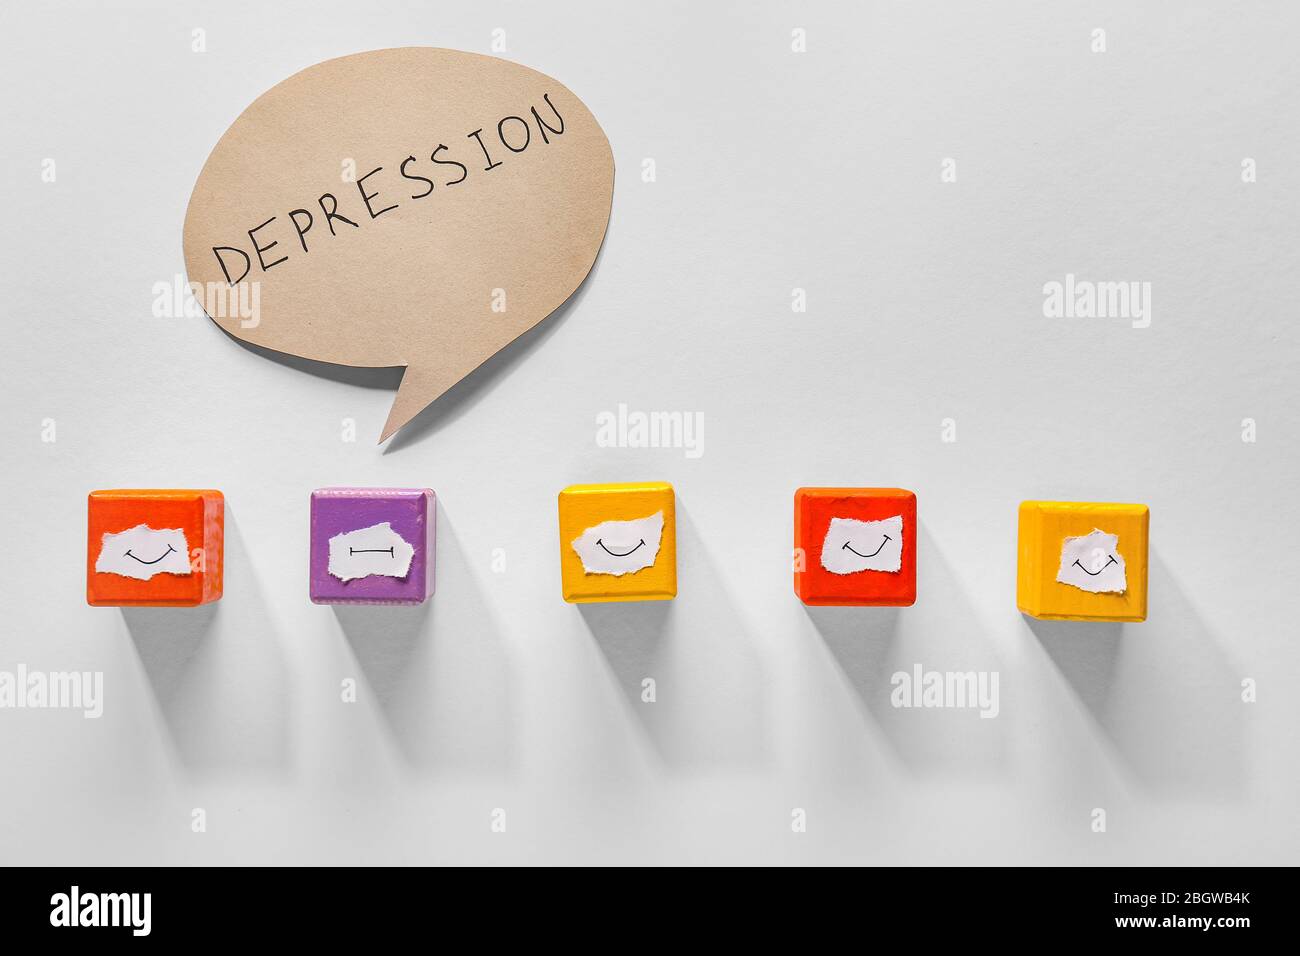 One cube with drawn neutral mouth among happy ones and speech bubble with text DEPRESSION on white background Stock Photo